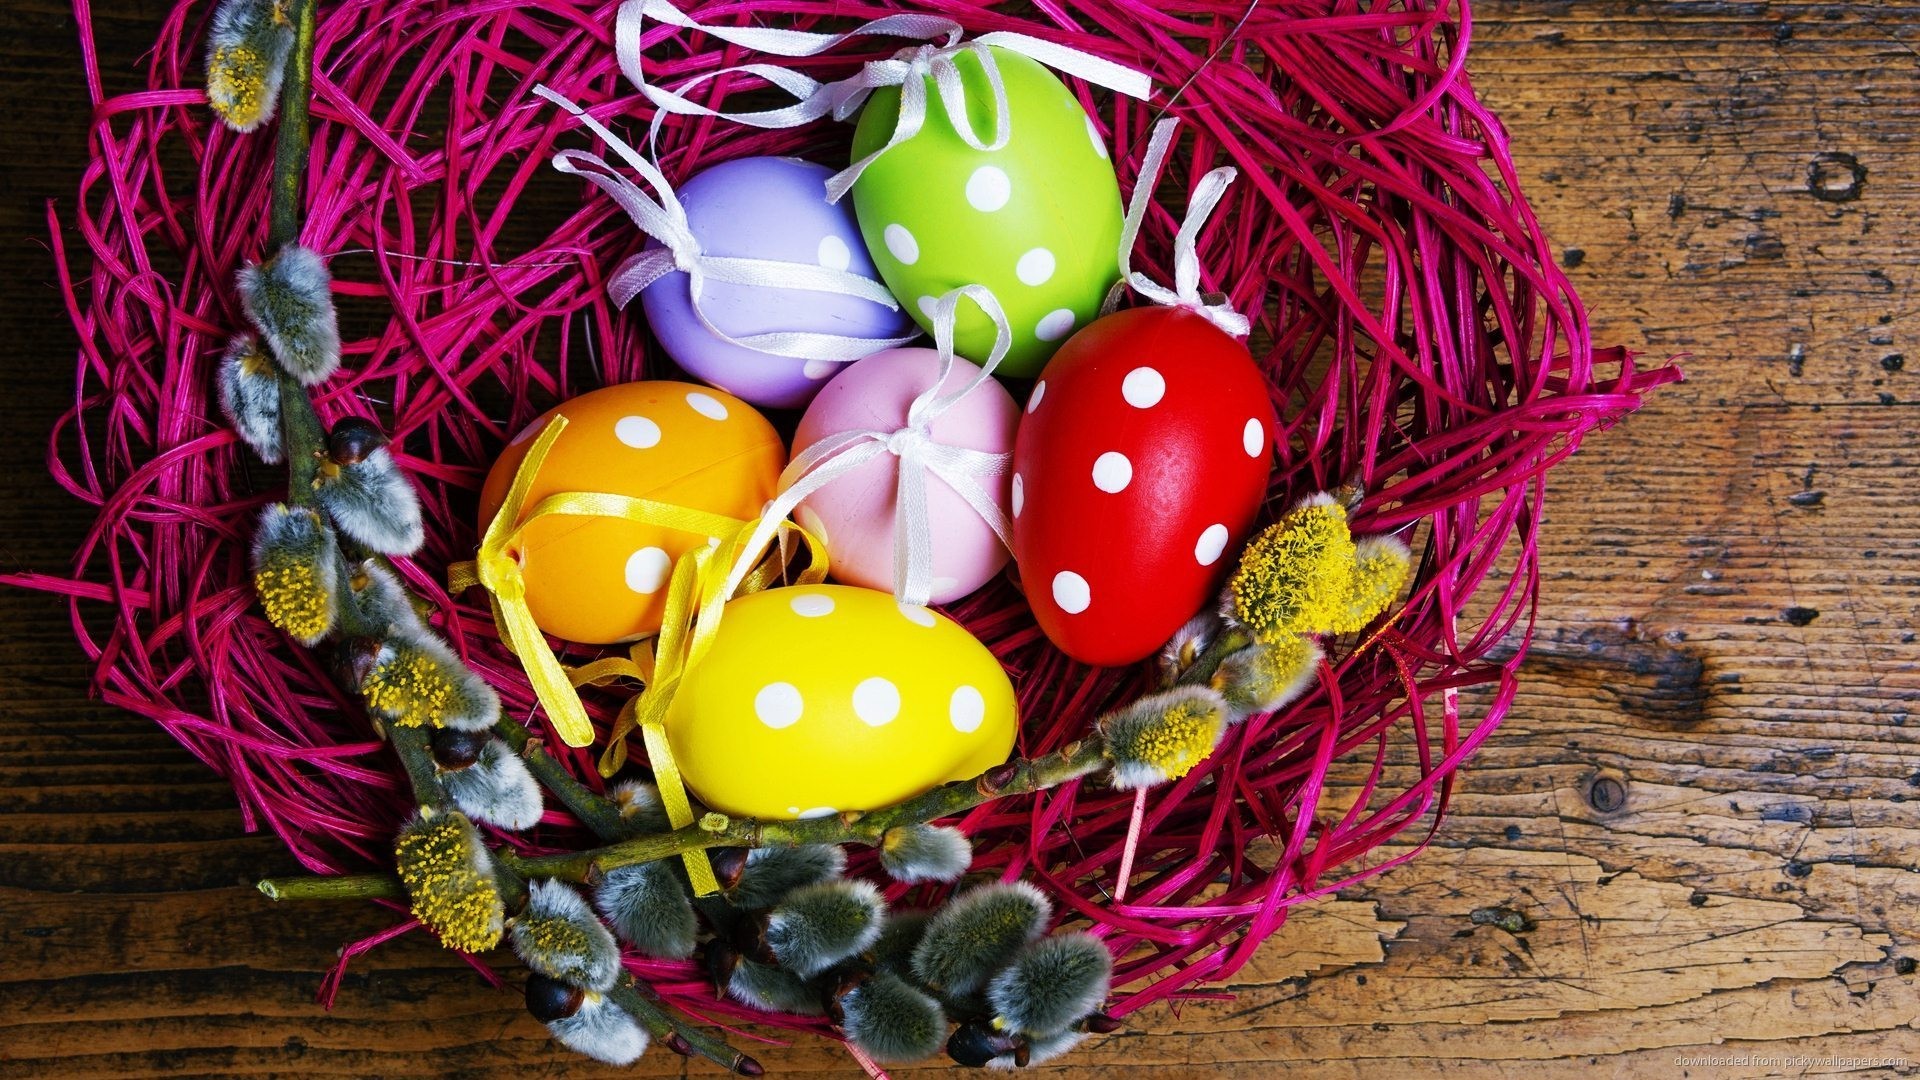 1920x1080 Colorful Easter Eggs In Basket